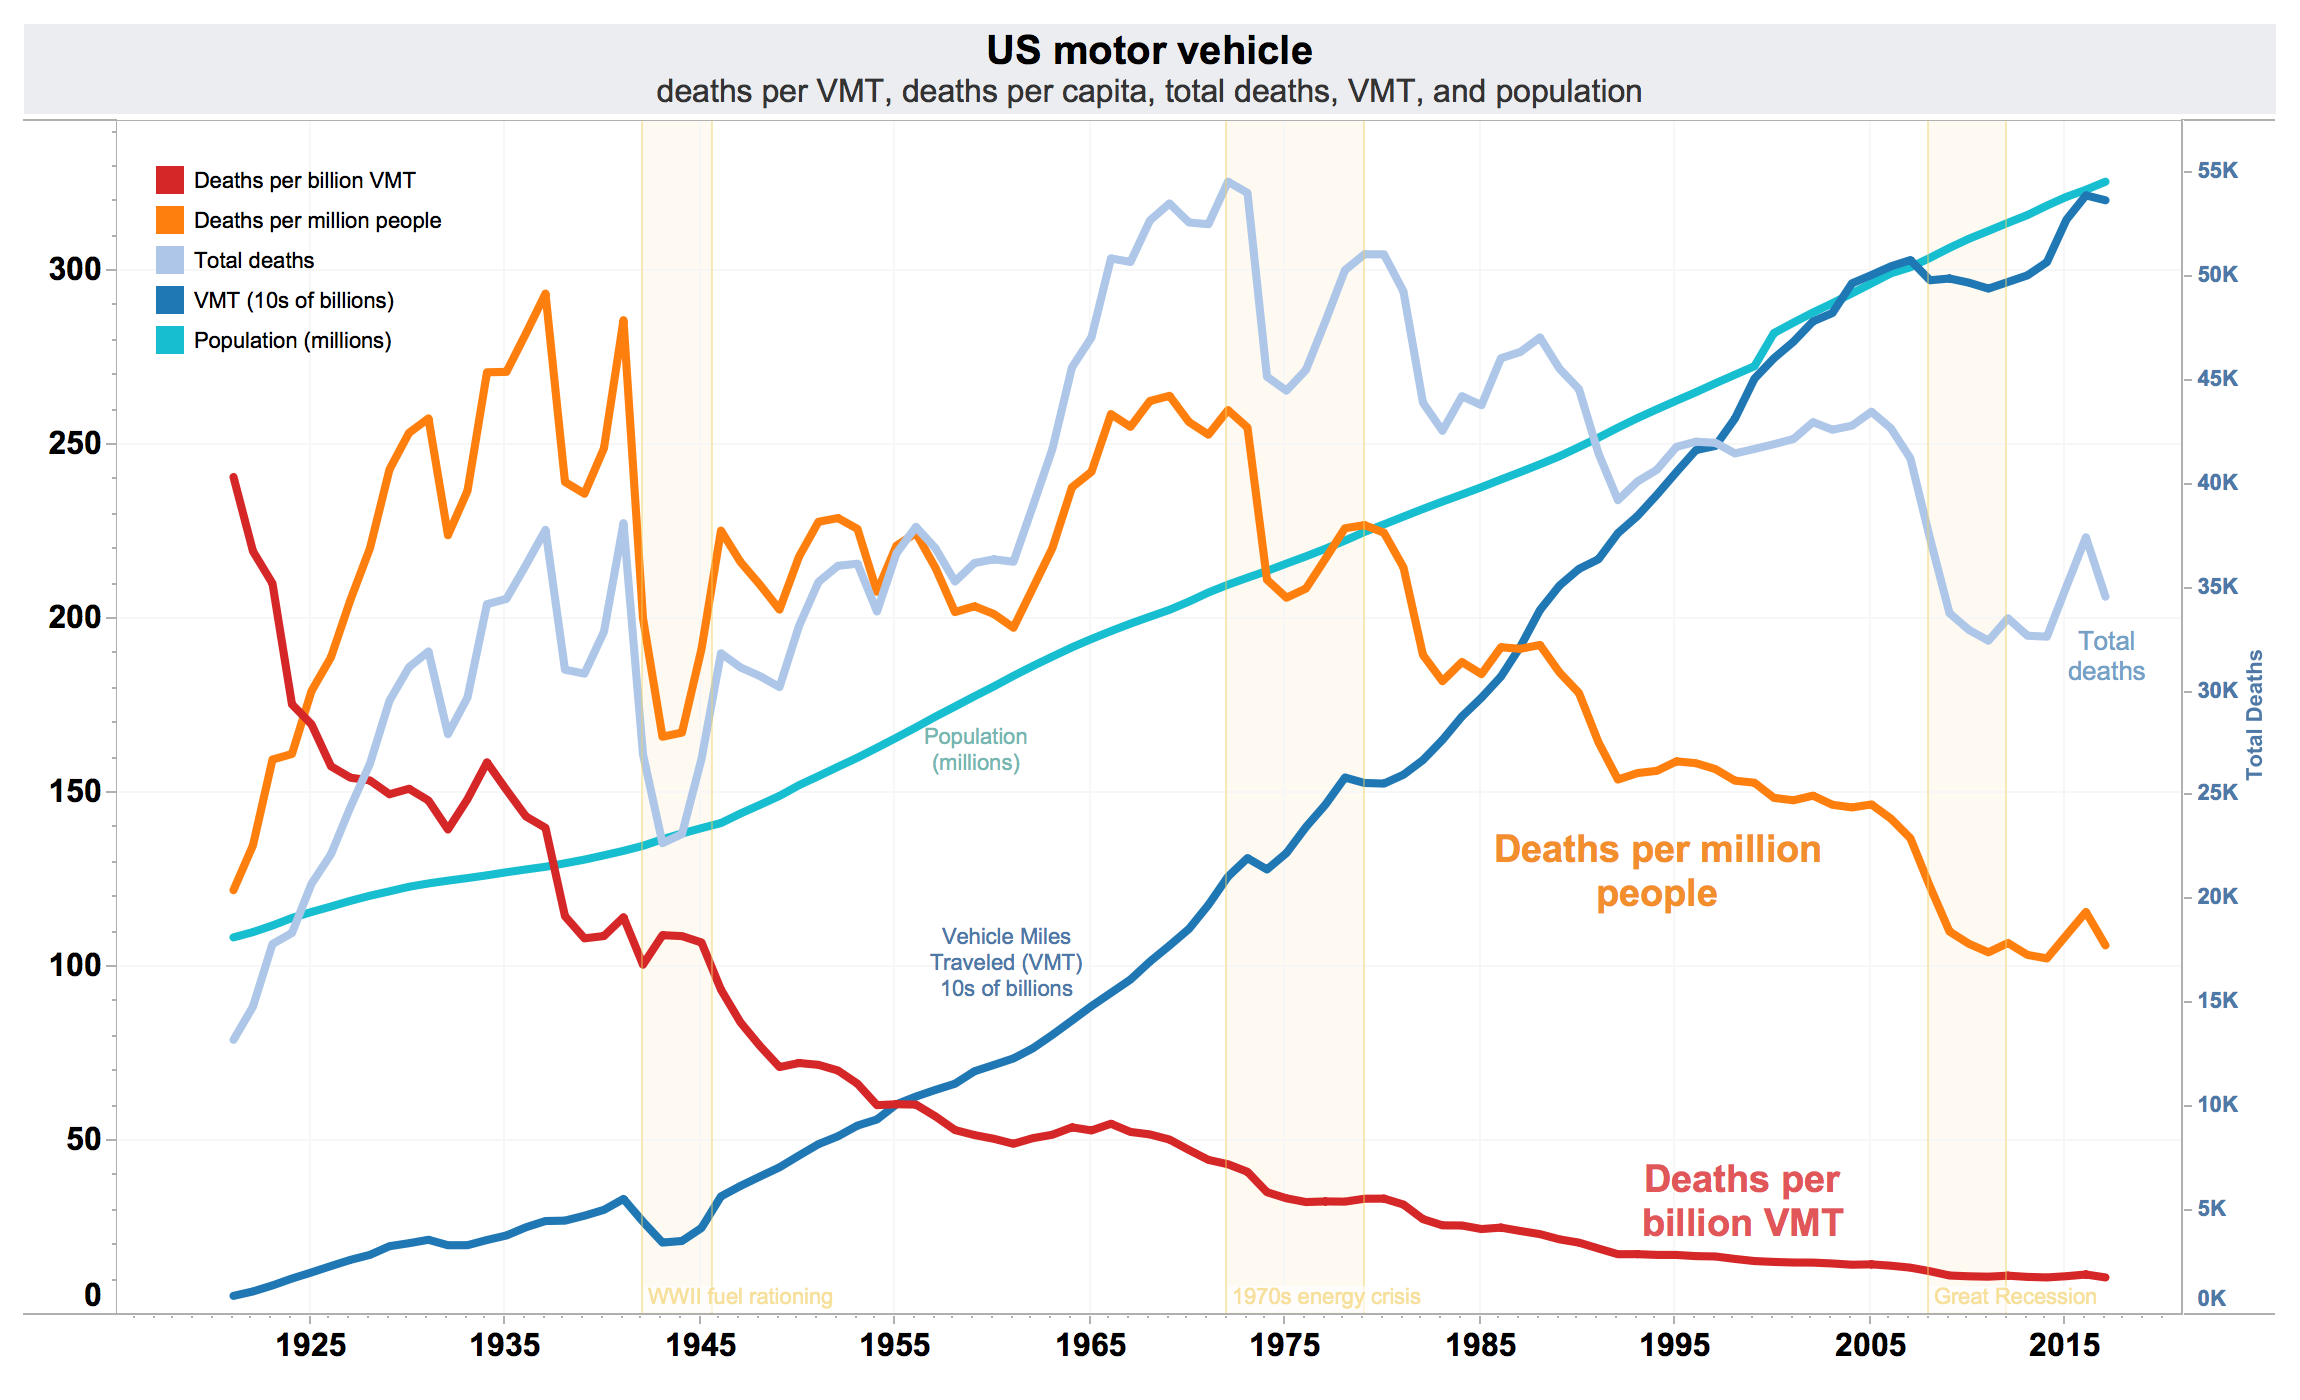 US_traffic_deaths_per_VMT%2C_VMT%2C_per_capita%2C_and_total_annual_deaths.png